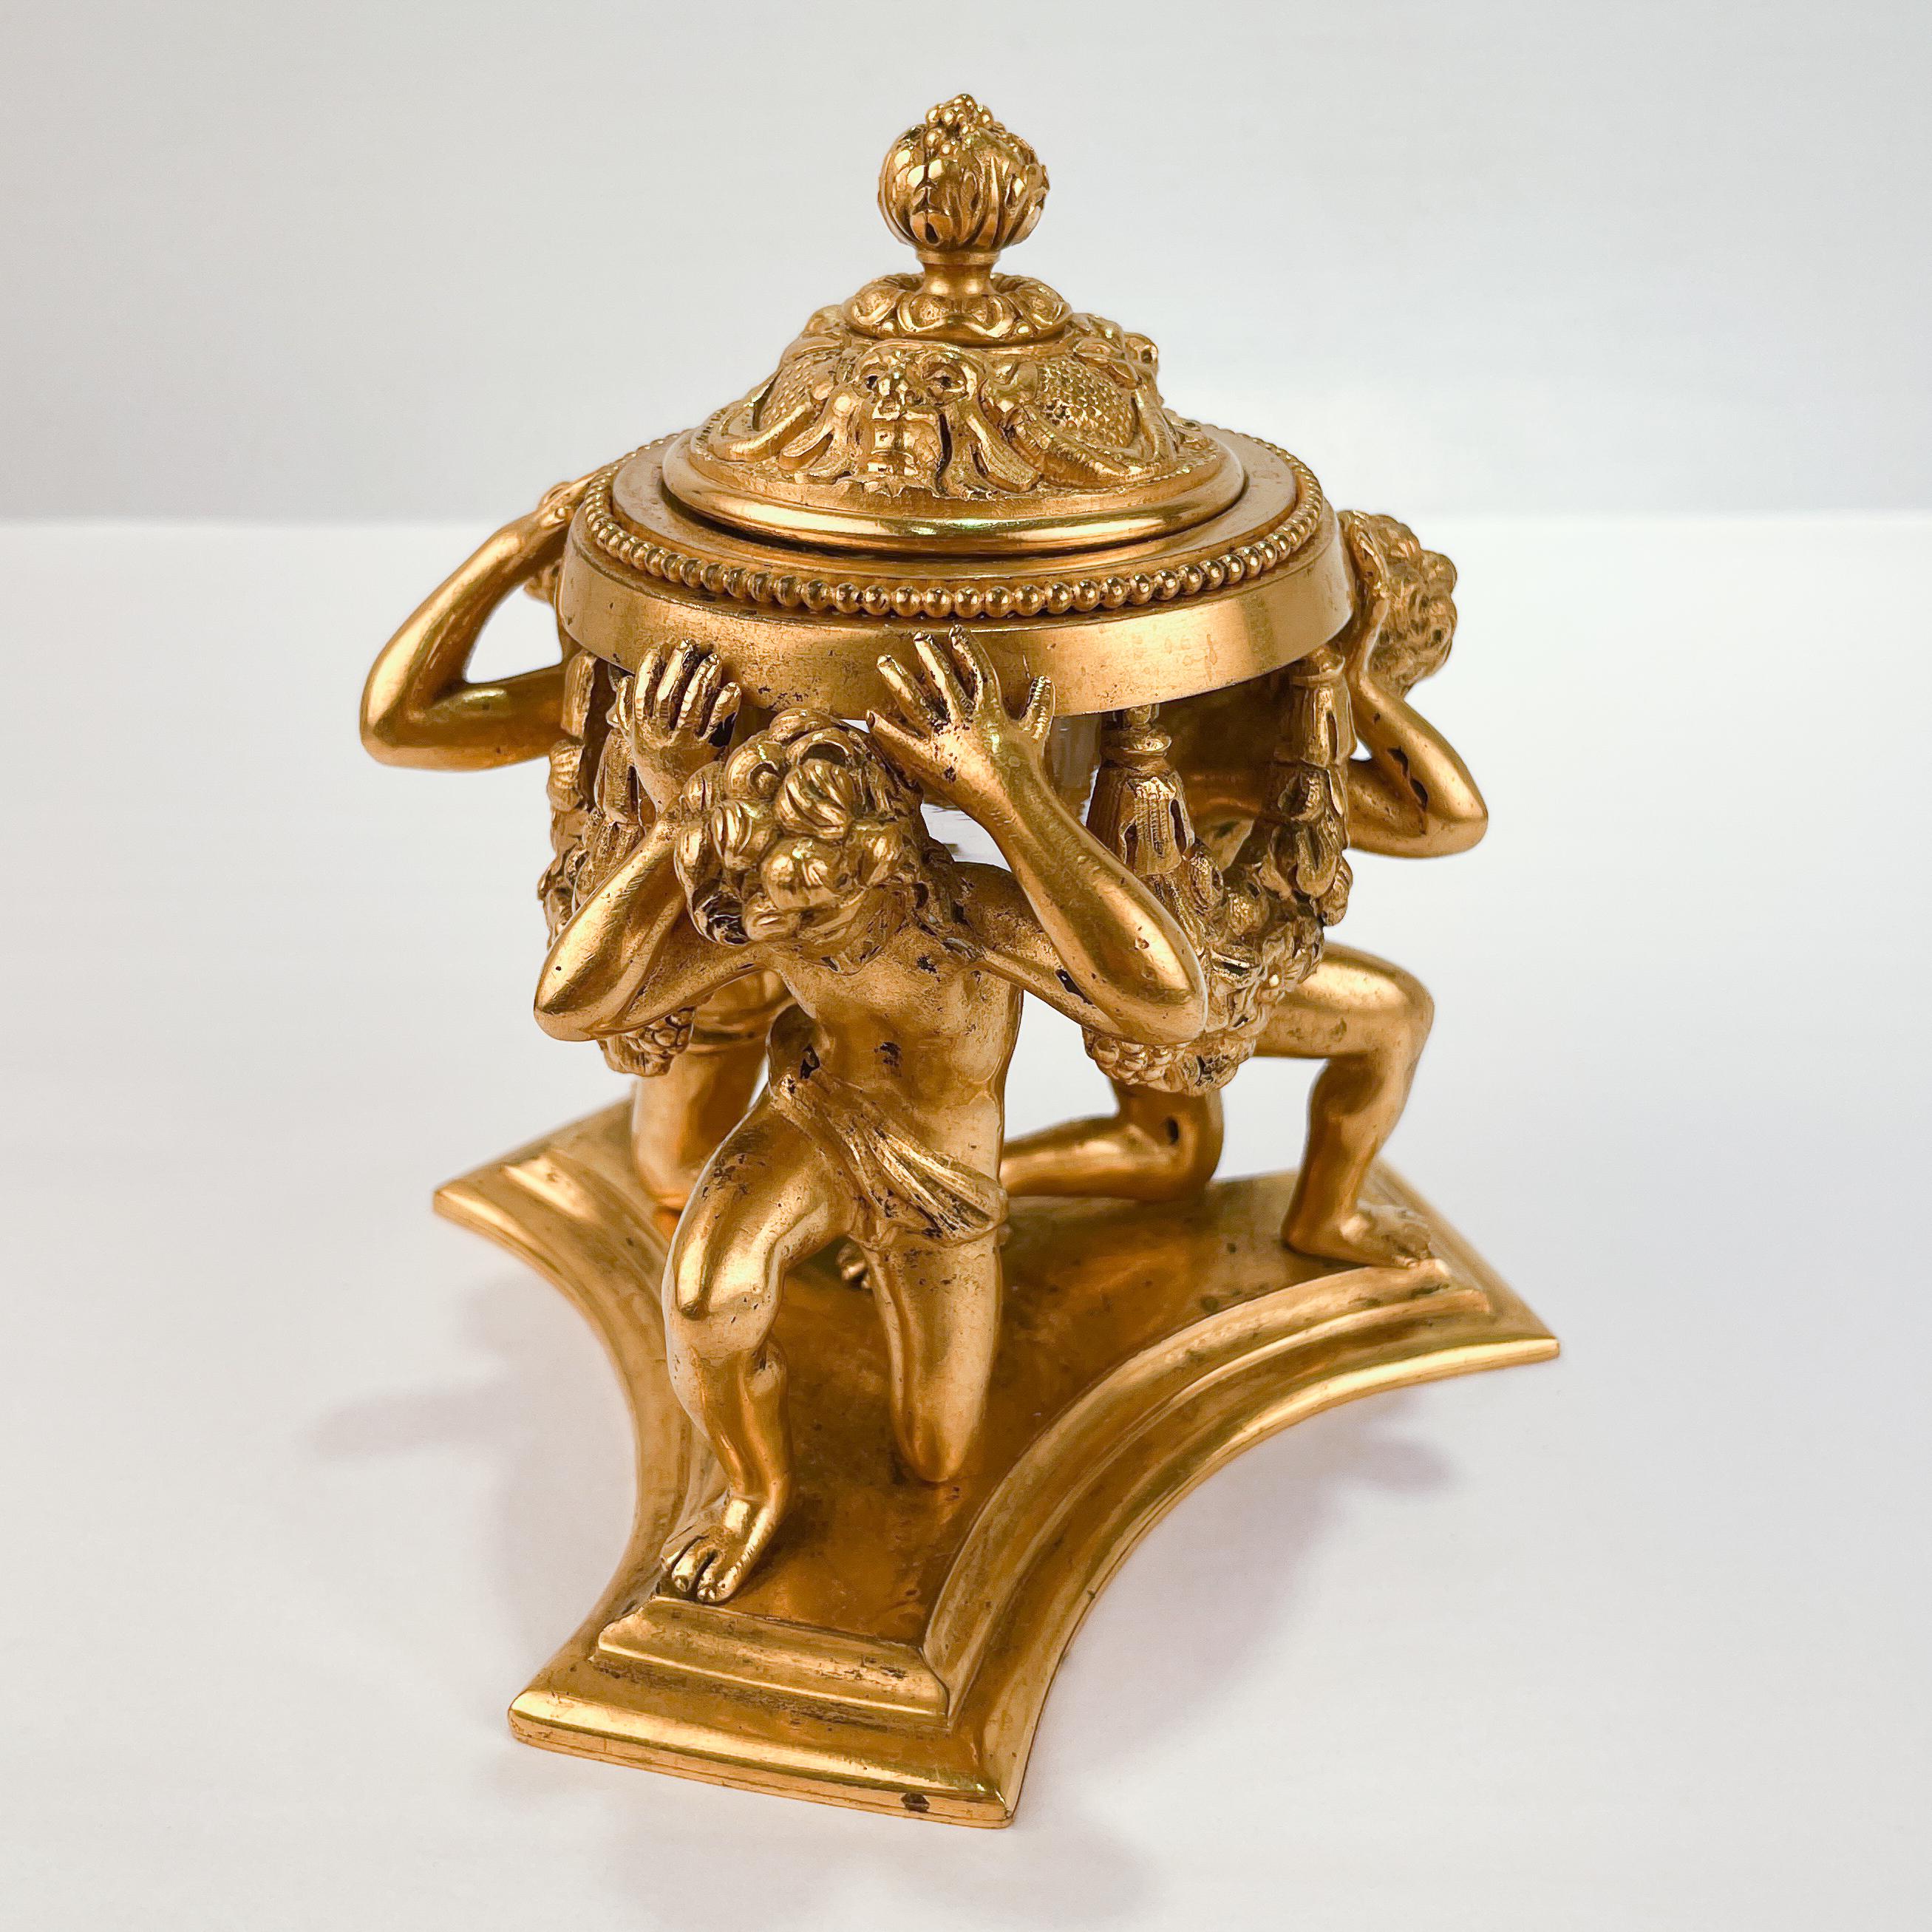 A fine antique bronze inkwell.

By E. F. Caldwell.

With a hinged top and glass inkwell insert supported by three kneeling youths on a trefoil base. 

Marked to the base with a Caldwell factory mark.

Simply a wonderful